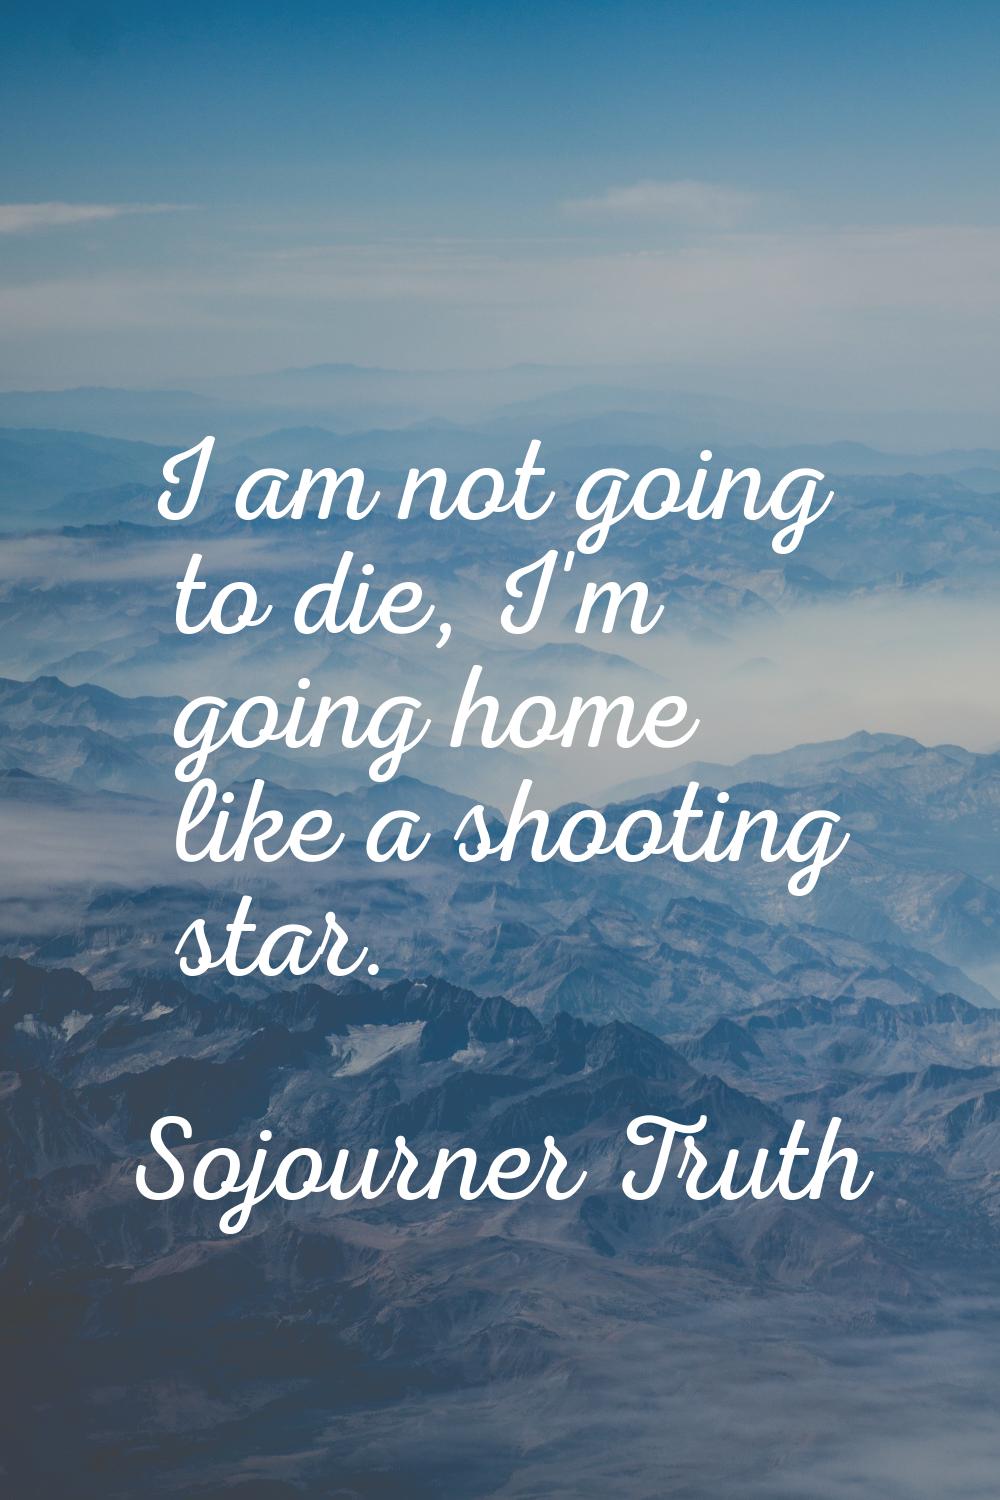 I am not going to die, I'm going home like a shooting star.